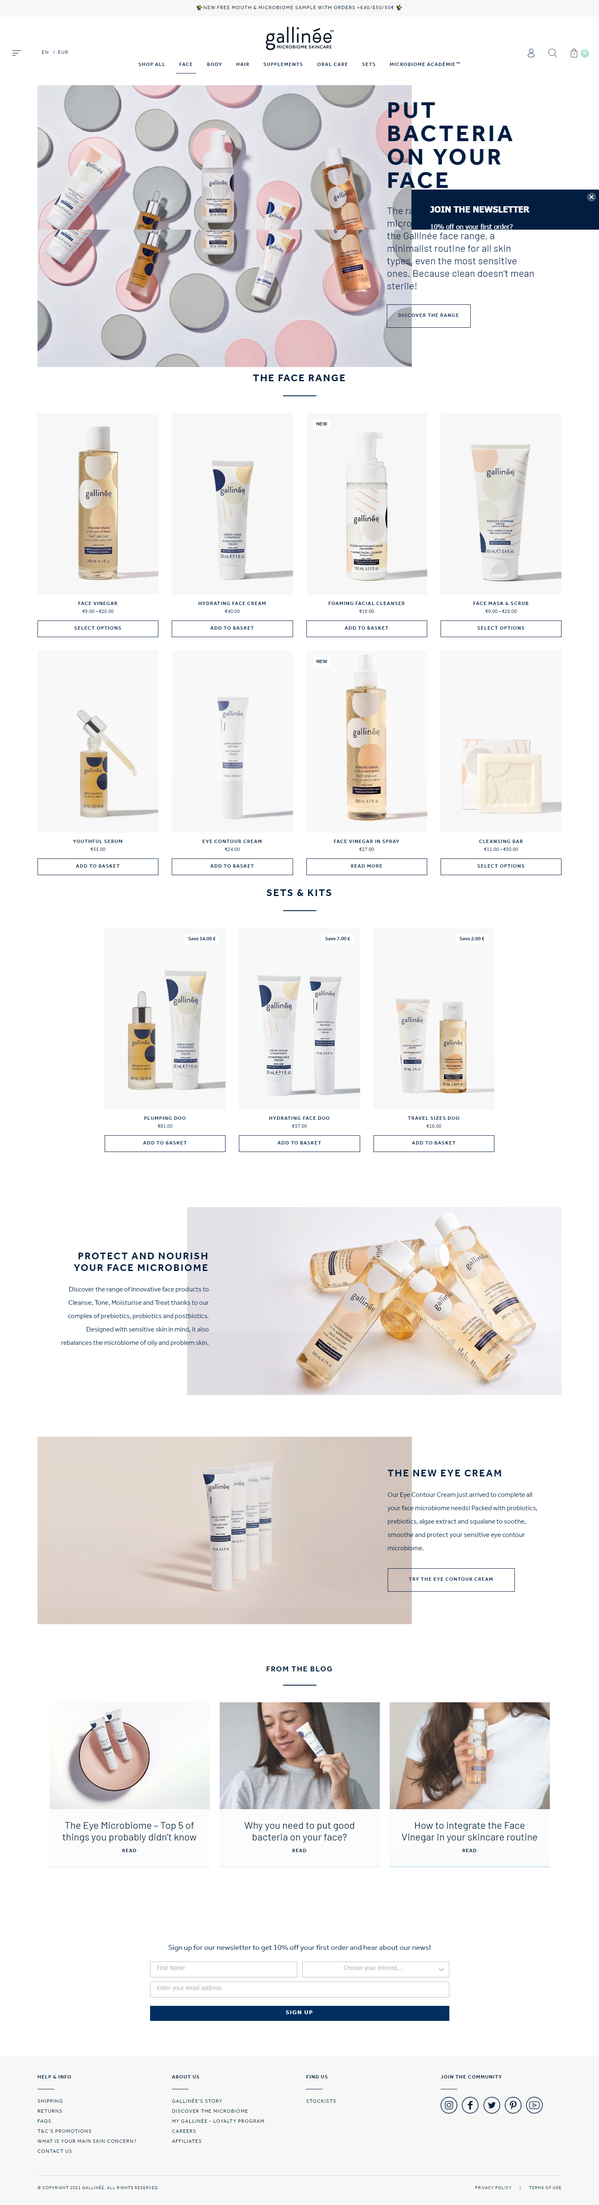 - Face Microbiome Skincare Products - Gallinée - www.gallinee.com.png